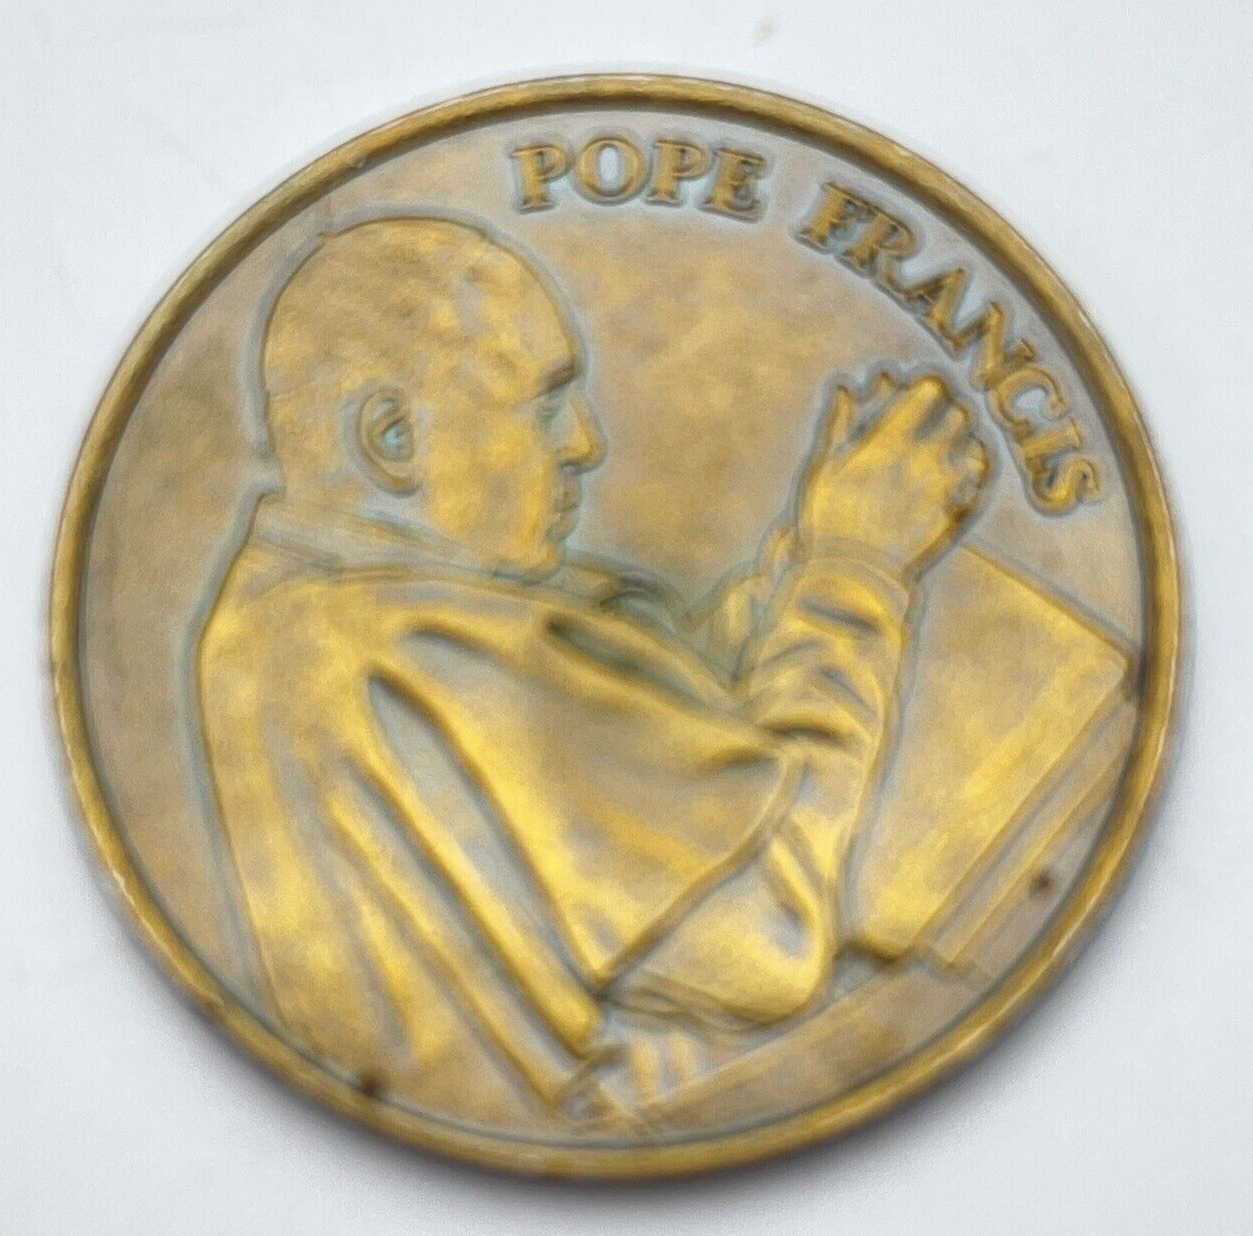 POPE FRANCIS Pocket Coin Religious Double SIded Brass Tone Medal Vintage